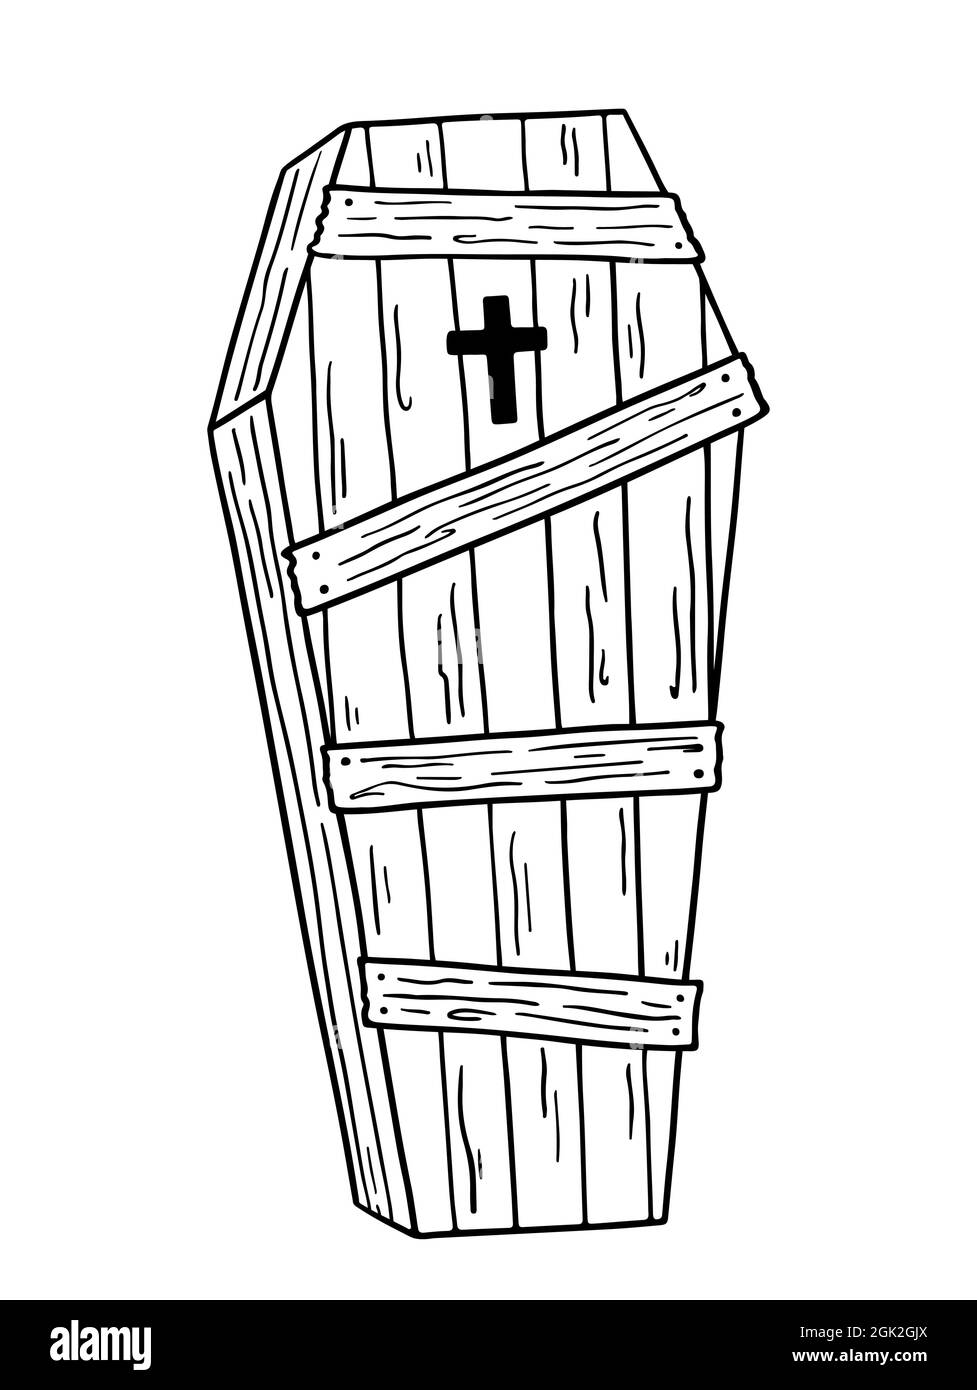 Wooden boarded up coffin with a cross isolated on white background. Hand-drawn vector illustration in doodle style. Perfect for Halloween designs, cards, logo Stock Vector